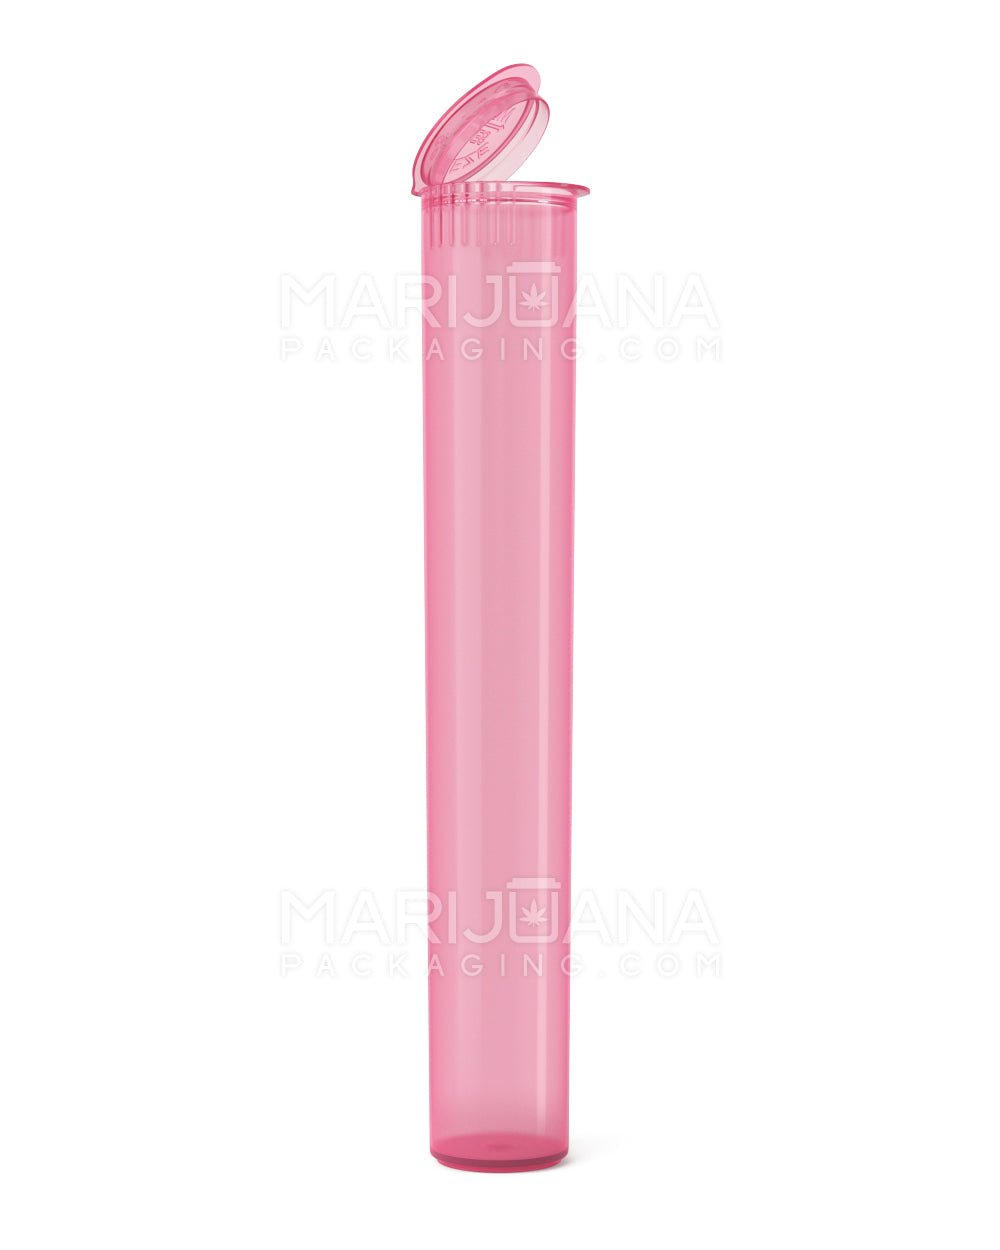 Child Resistant | King Size Pop Top Translucent Plastic Pre-Roll Tubes | 116mm - Pink- 1000 Count - 1